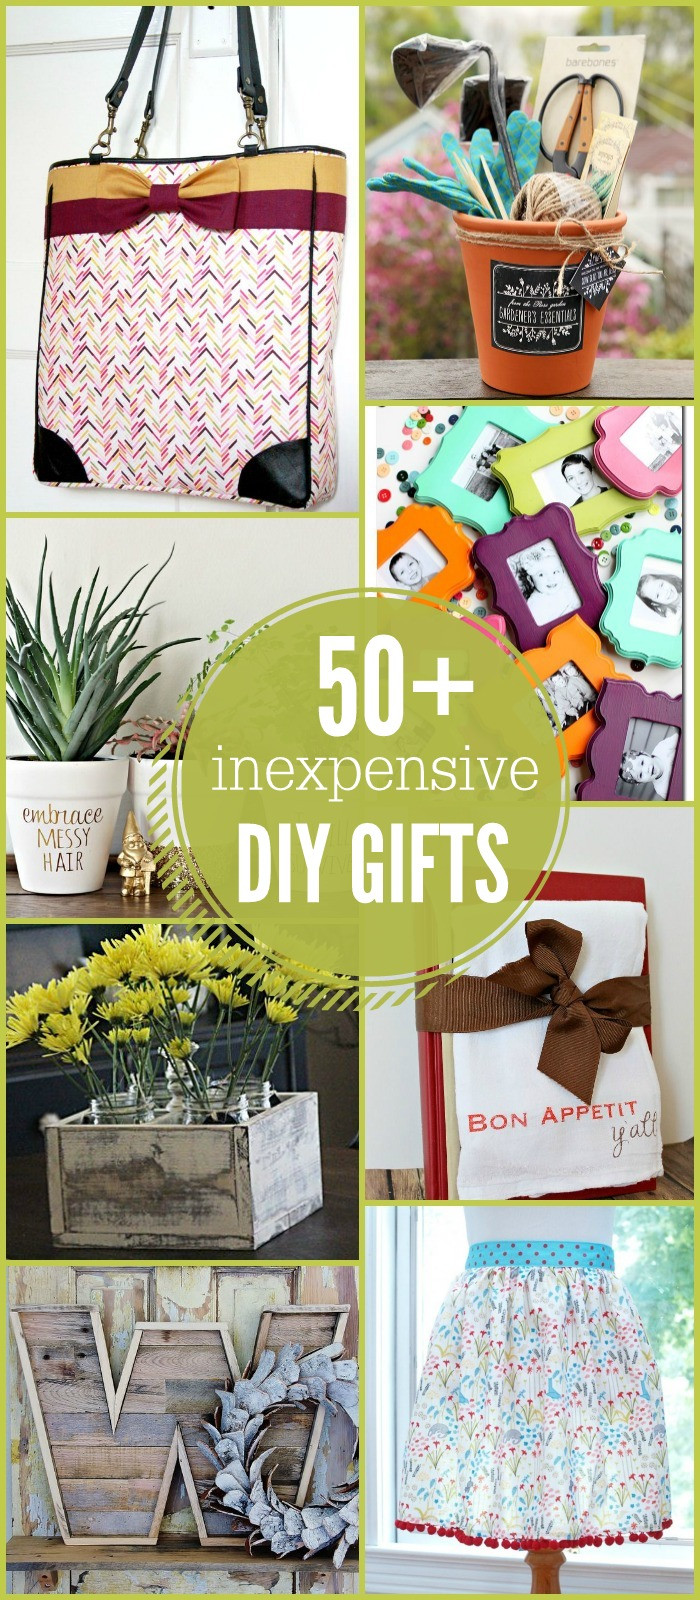 Cool Christmas Gift Ideas
 50 Inexpensive DIY Gift Ideas